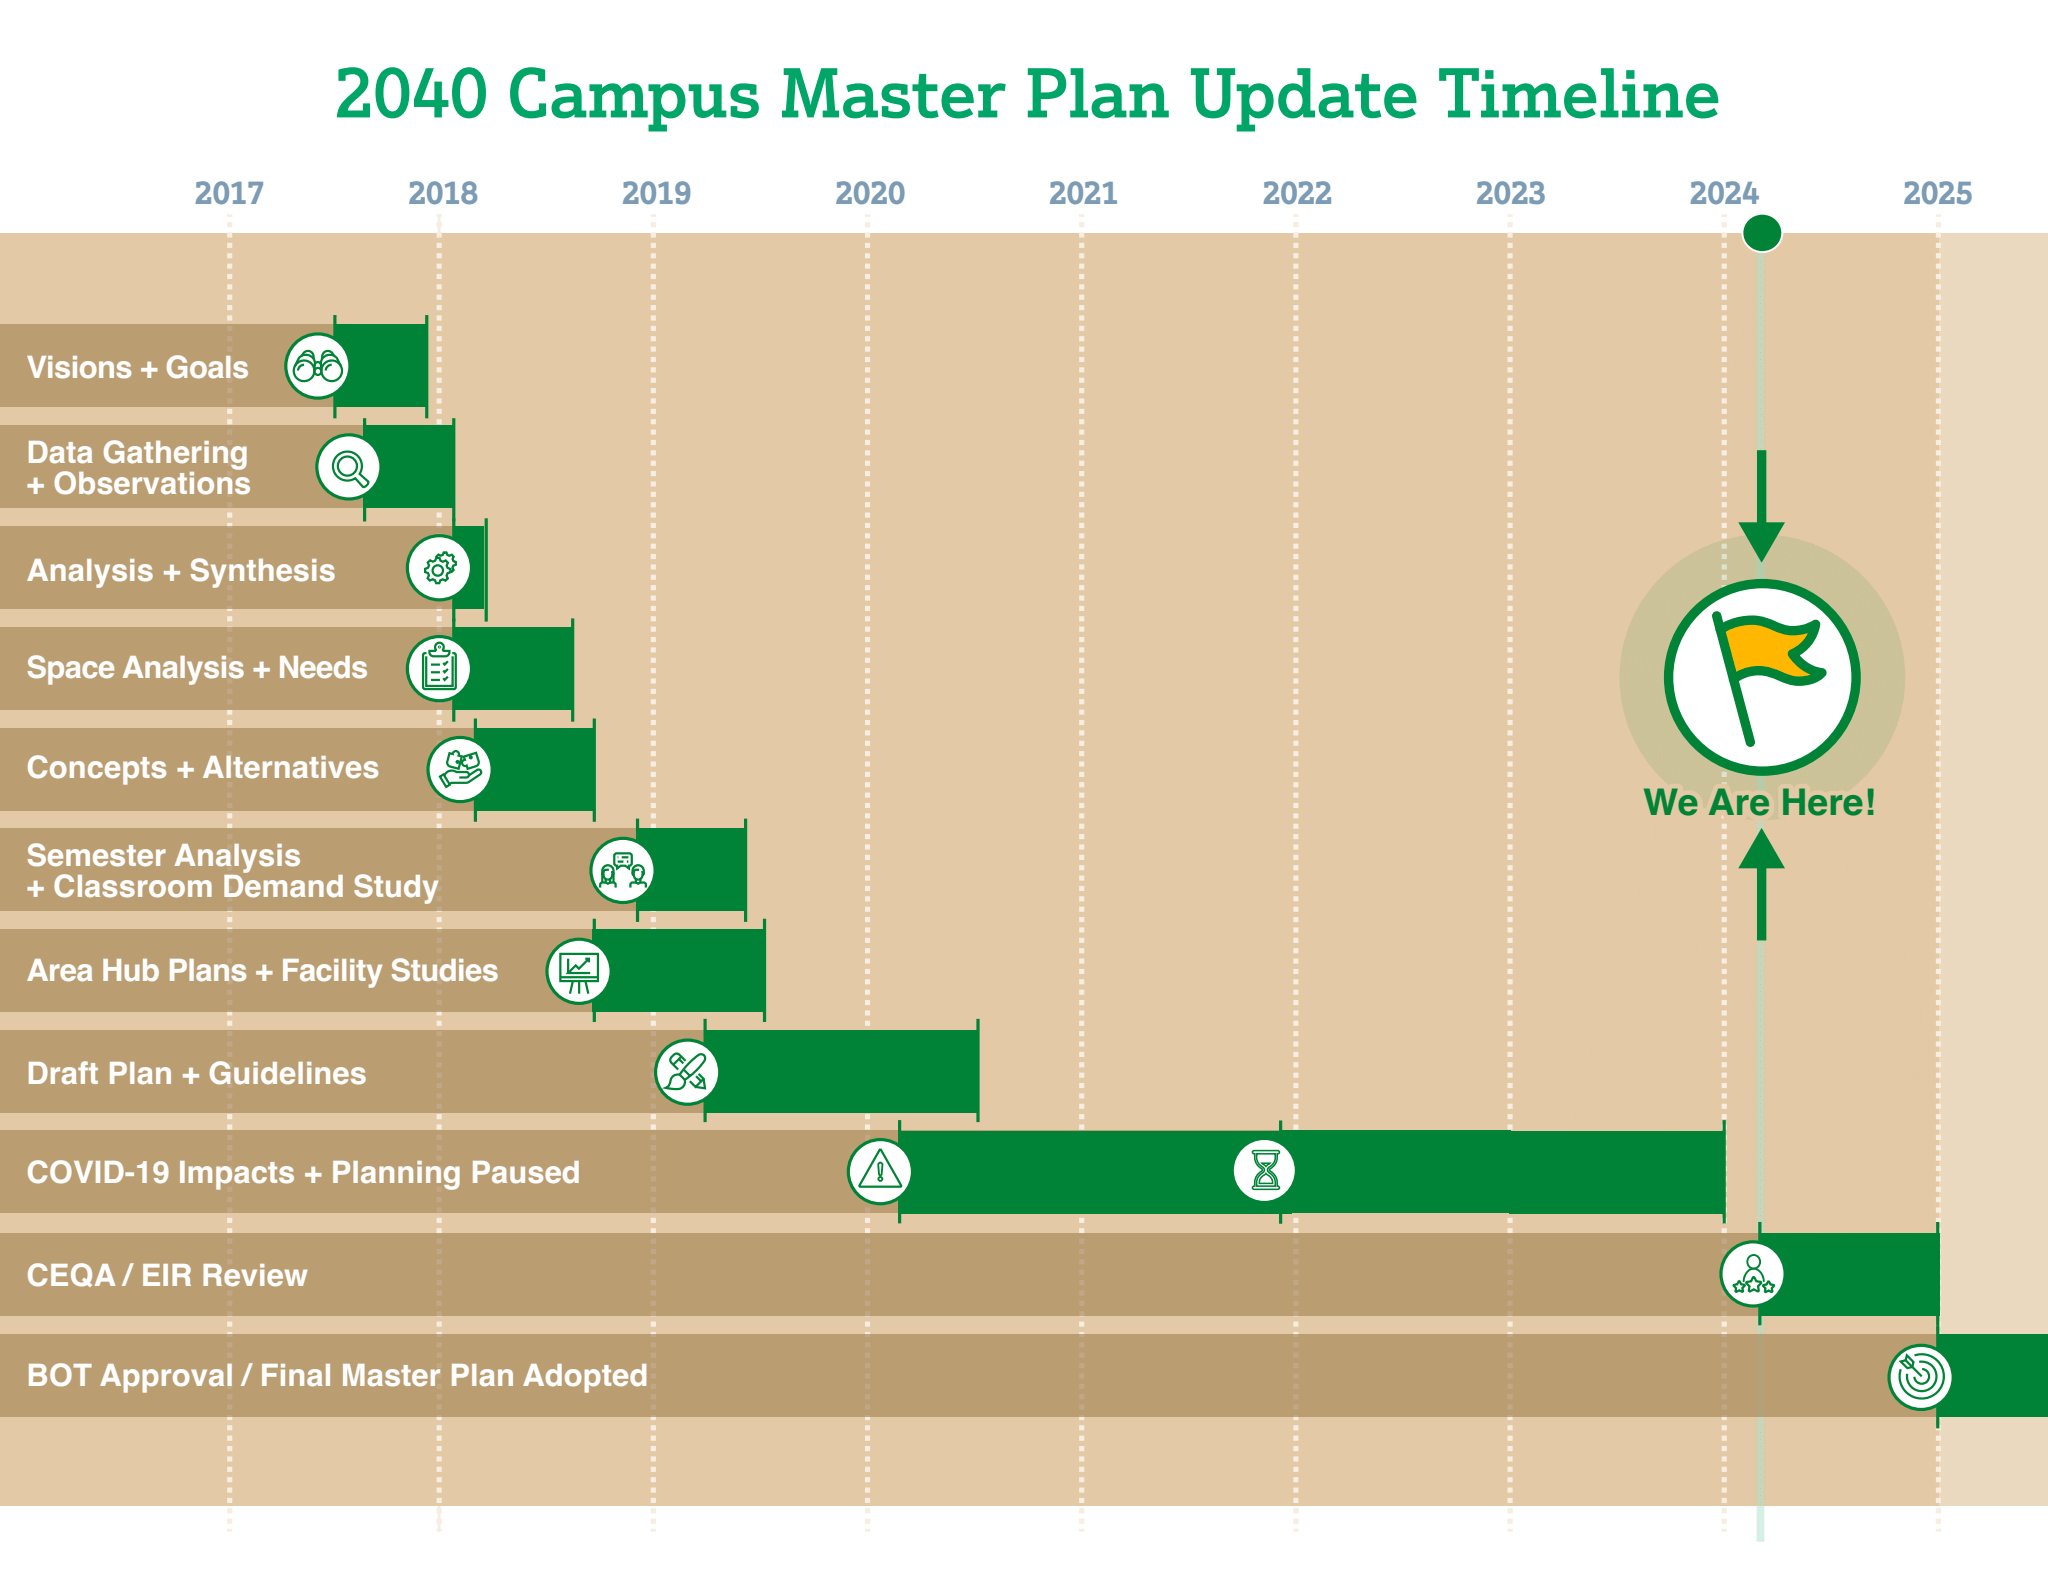 2040 Campus Master Plan Update timeline.  Bar graph depicting major milestones towards development and approval of the 2040 campus master plan from years 2017 through 2025 timeframe. An arrow shows that the project is currently in the environmental review phase in year 2024 and approval is anticipated to occur in year 2025.